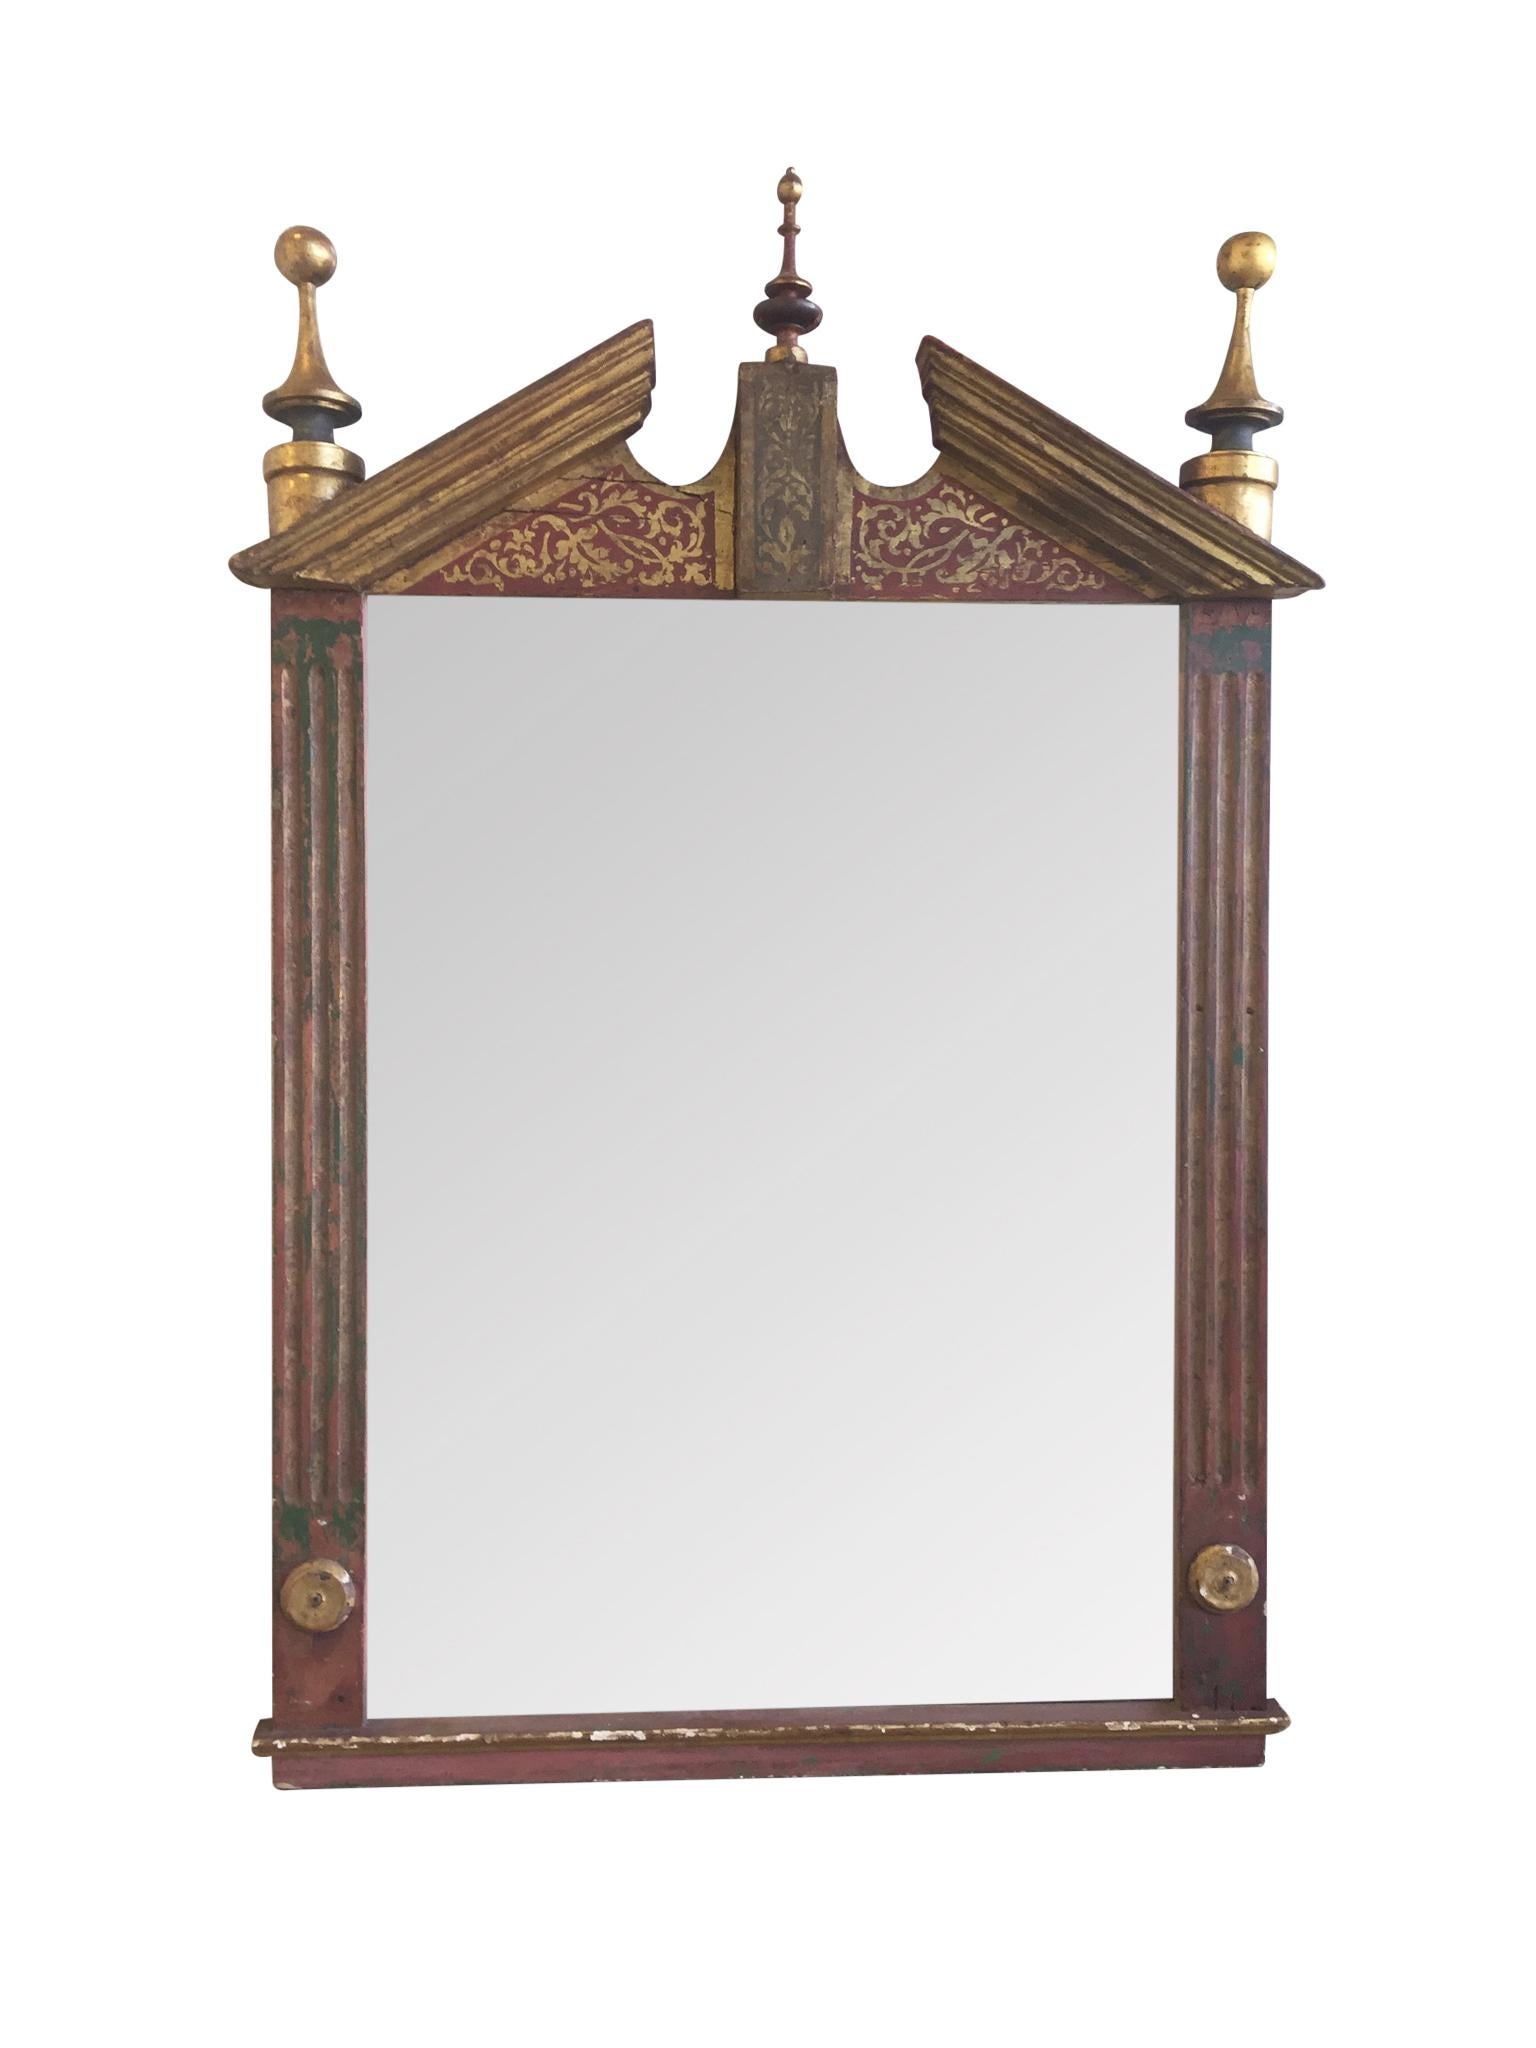 An elegant, finely aged wall mirror in the neoclassical style. Crafted in the early 20th century. The frame is comprised of wood painted with gold and a burgundy hue. The gilt detailing highlights certain elements of the mirror, such as the